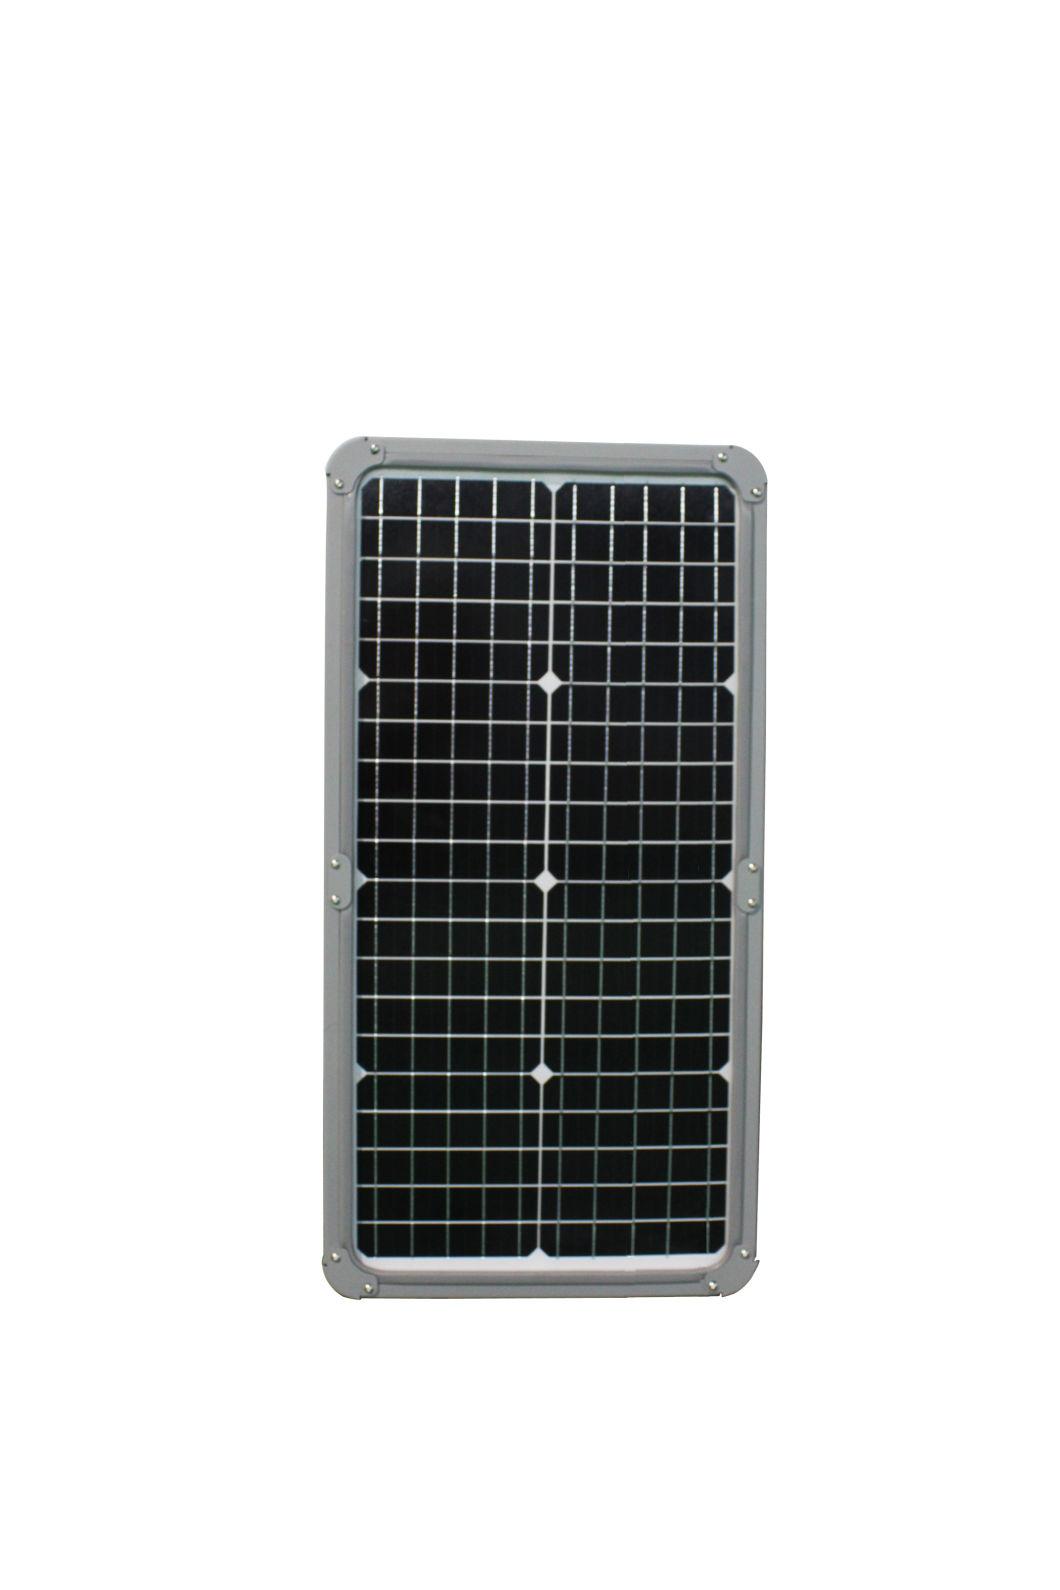 80watts All in One Solar Street Lighting Manufacturer in China